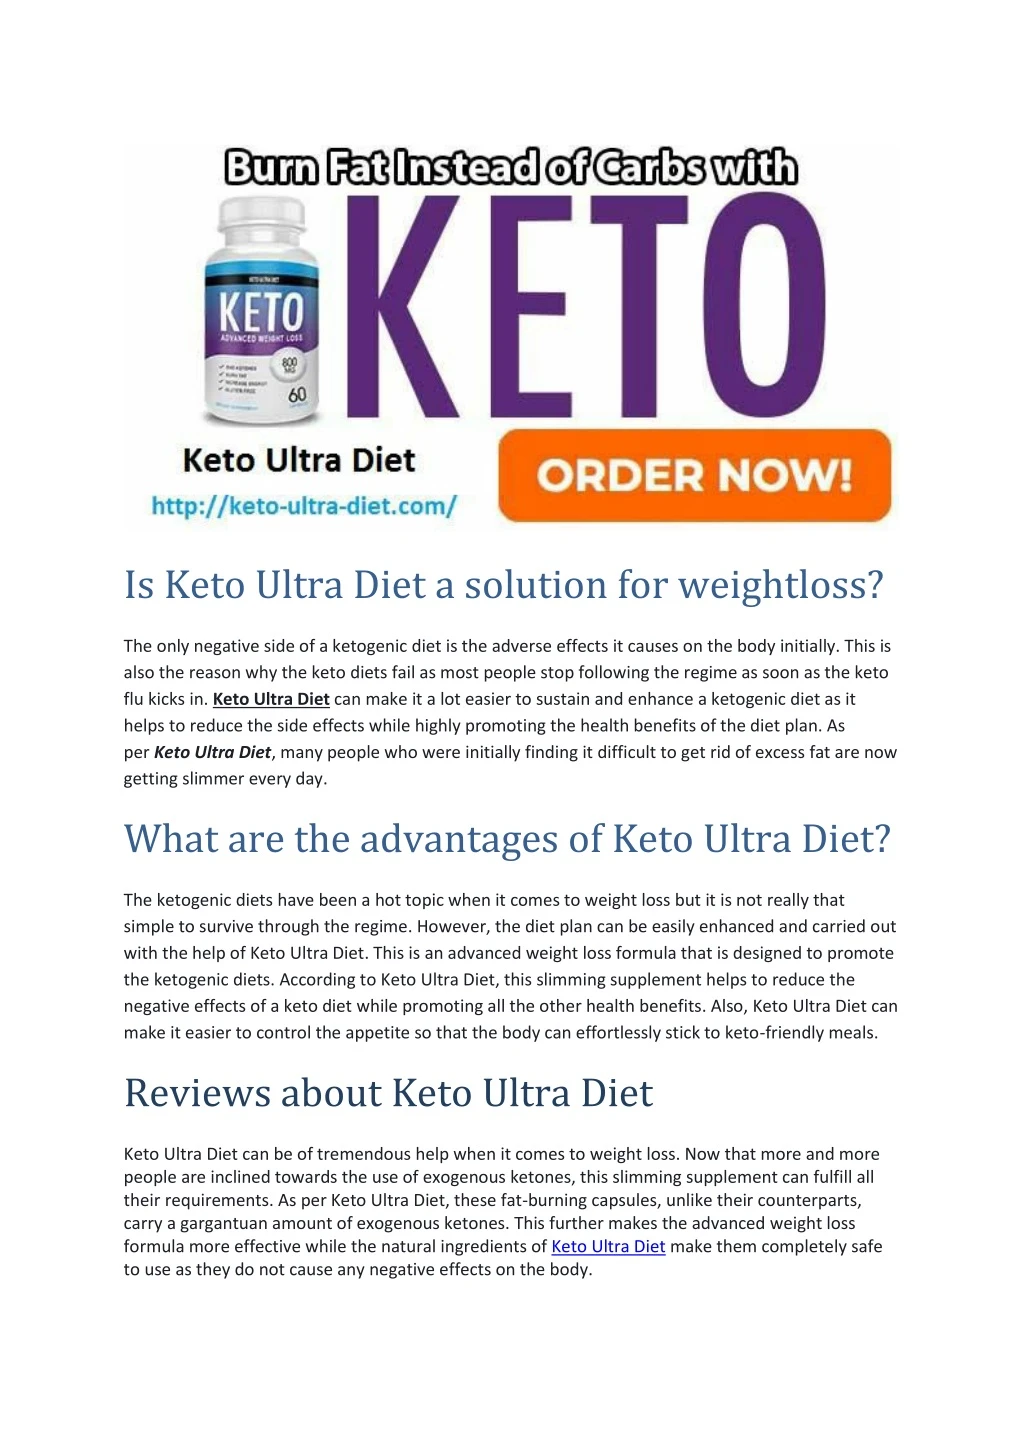 is keto ultra diet a solution for weightloss